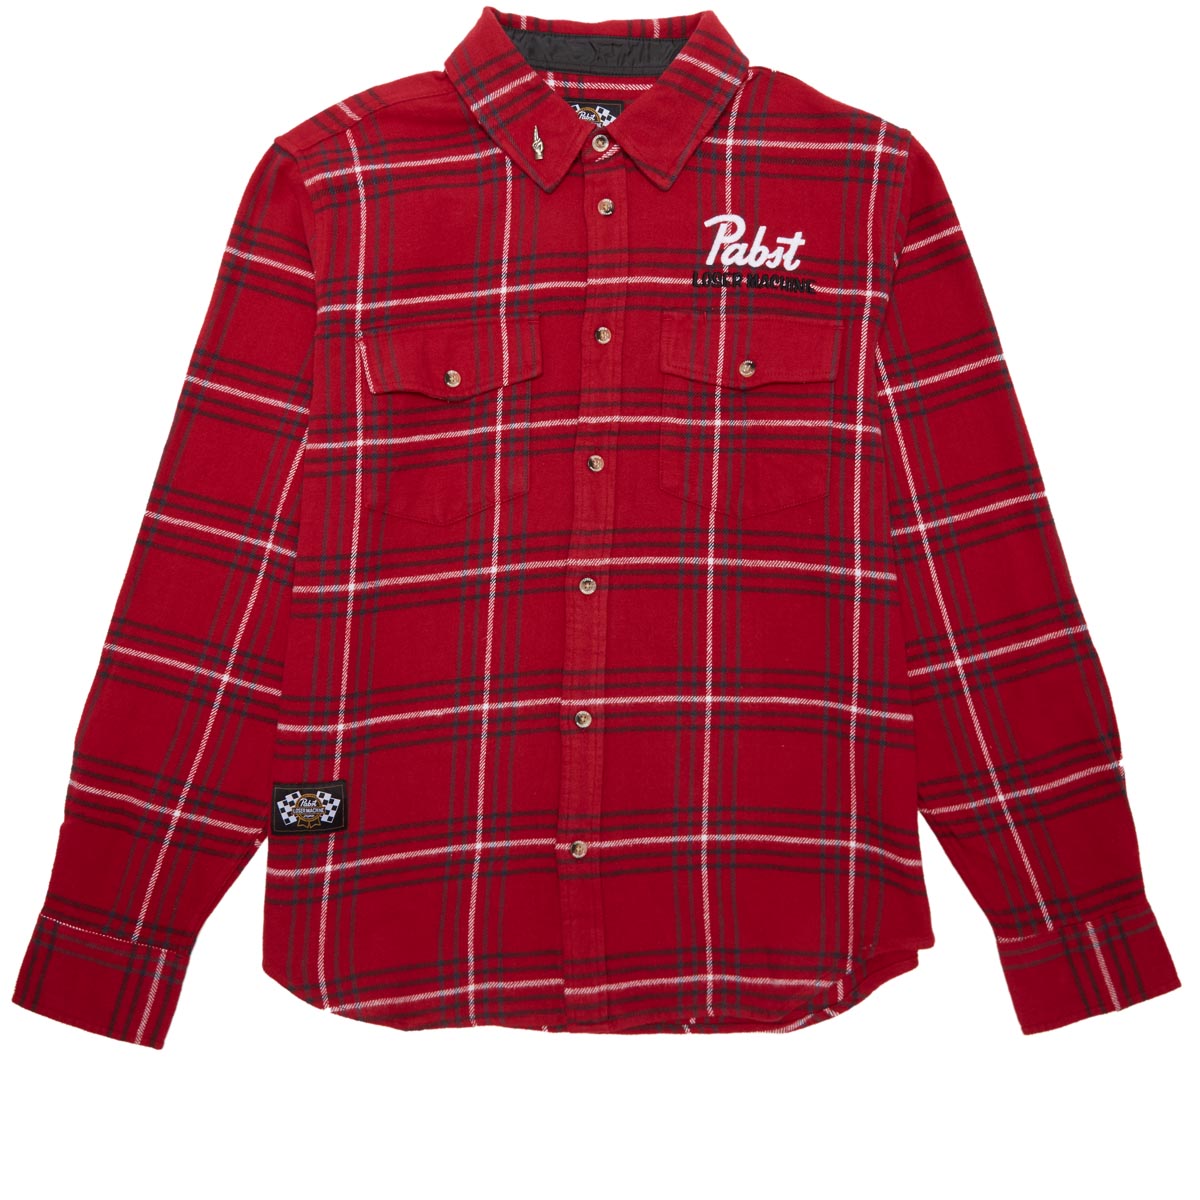 Loser Machine x Pabst Blue Ribbon Flannel Shirt - Red image 1